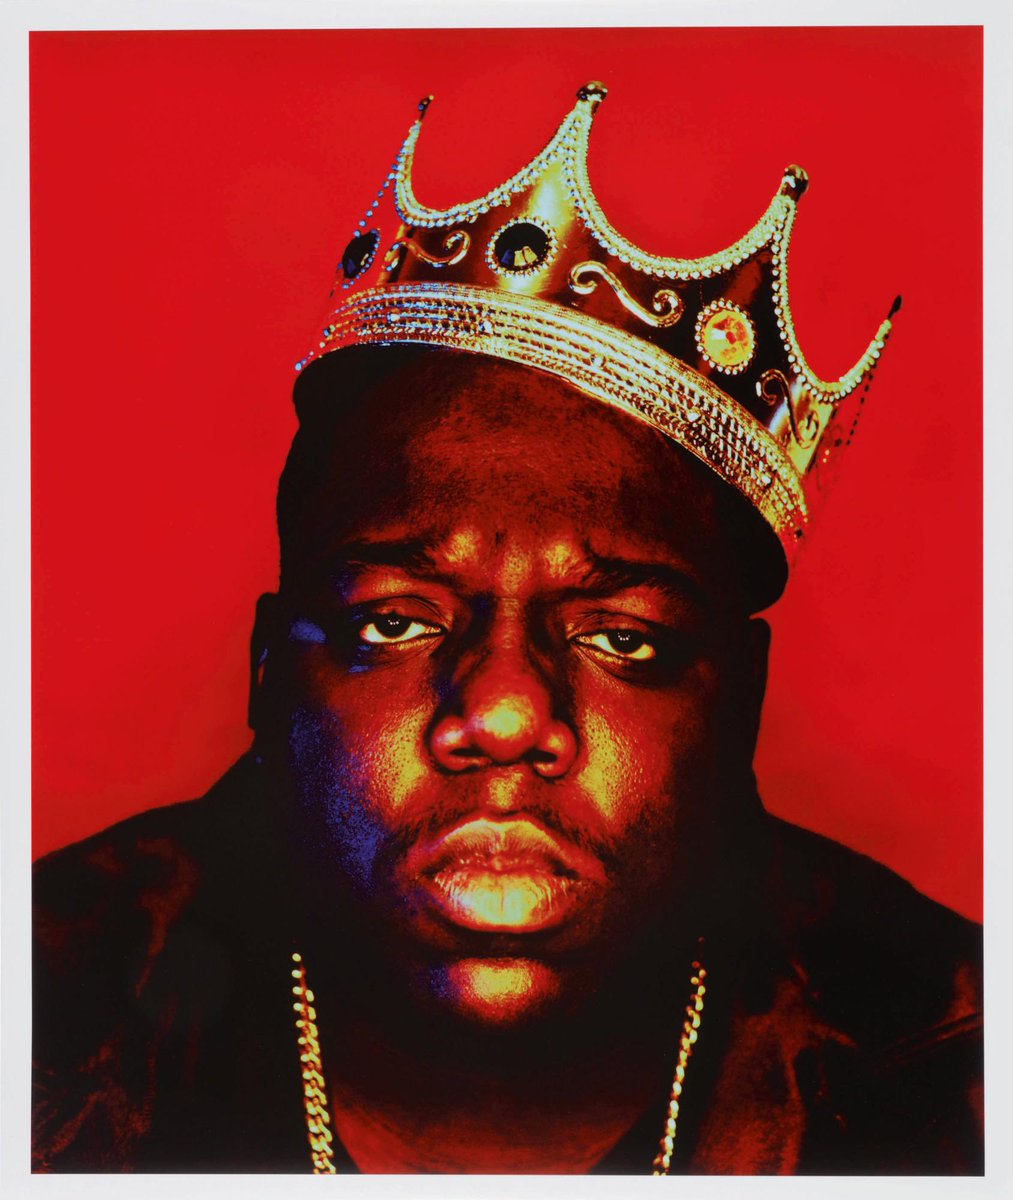 6: Biggie. You can consider this man one of the true “faces” of hip hop (of course along with pac) and his discog only goes to prove that point. His game is INCREDIBLY high and really did set the standards of N.Y rap and showed how for a while, this king was undefeated.